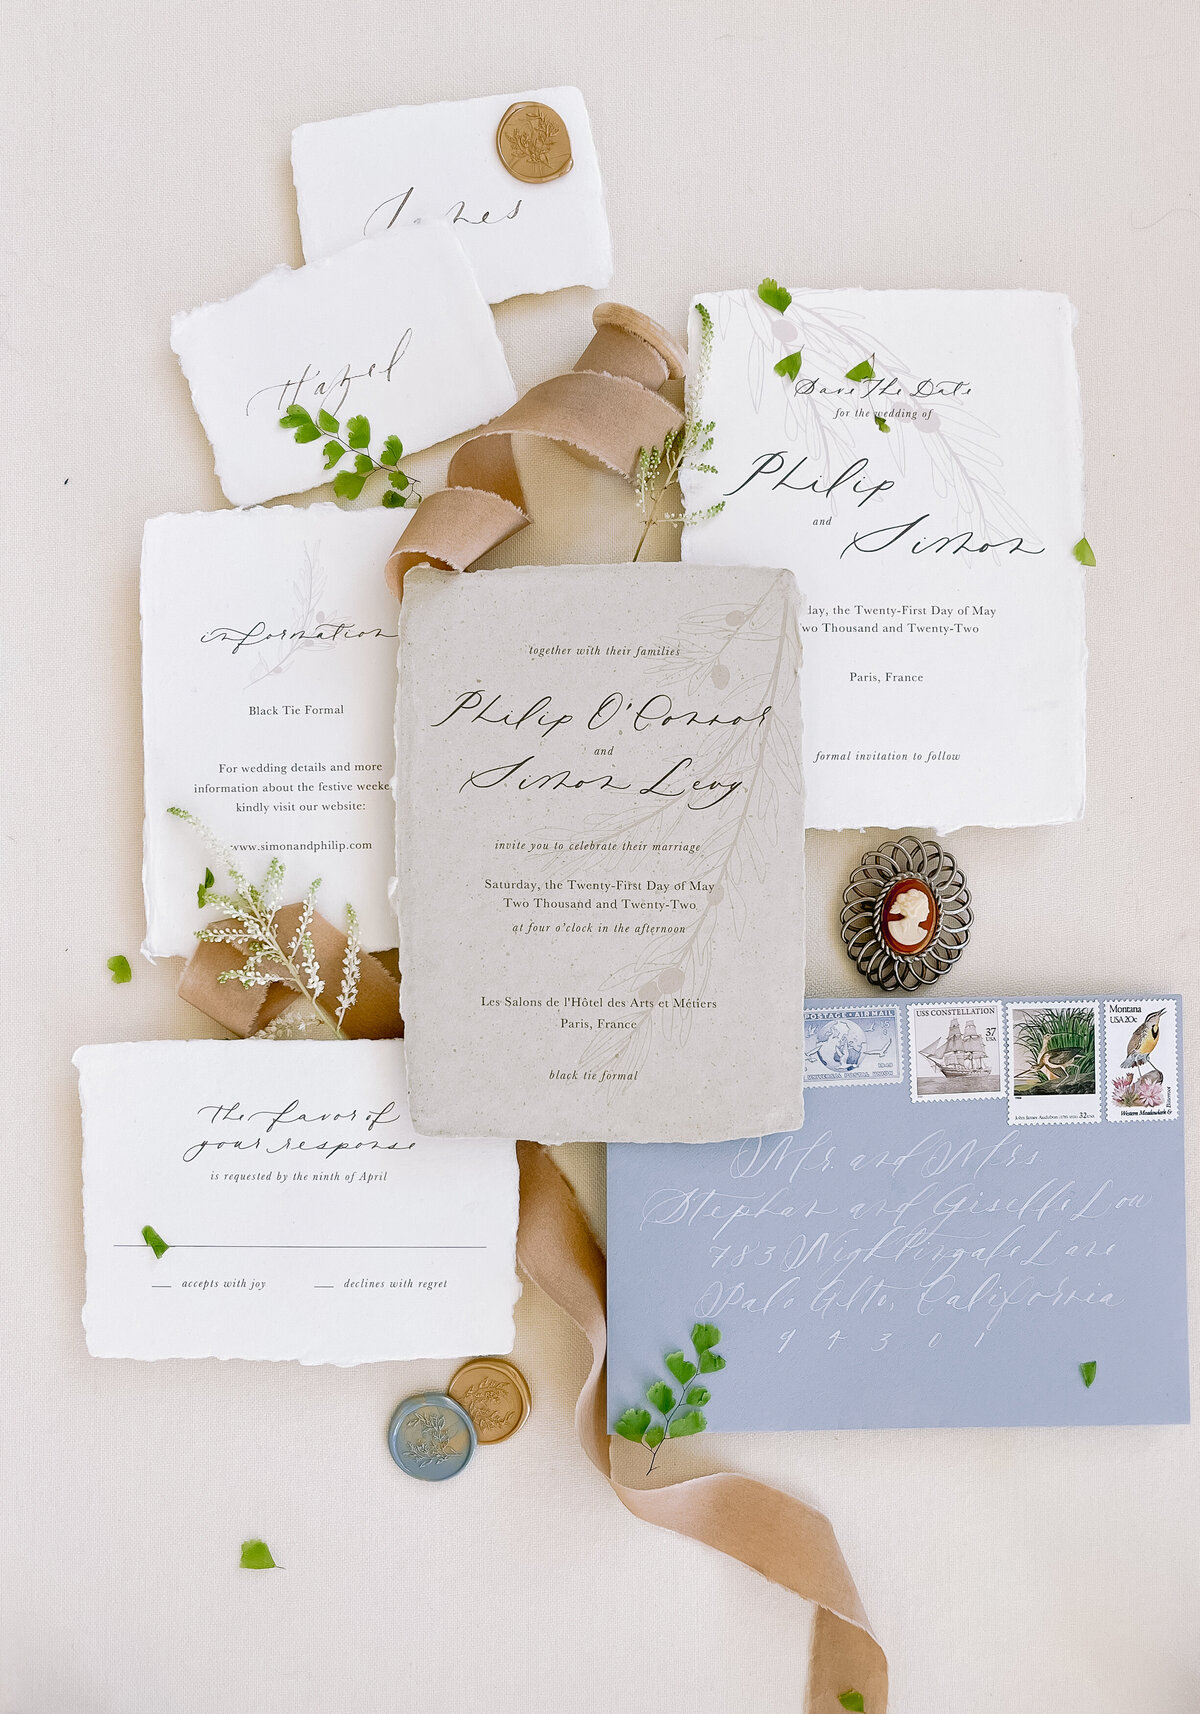 Handmade paper wedding invitations with place cards and silk ribbon